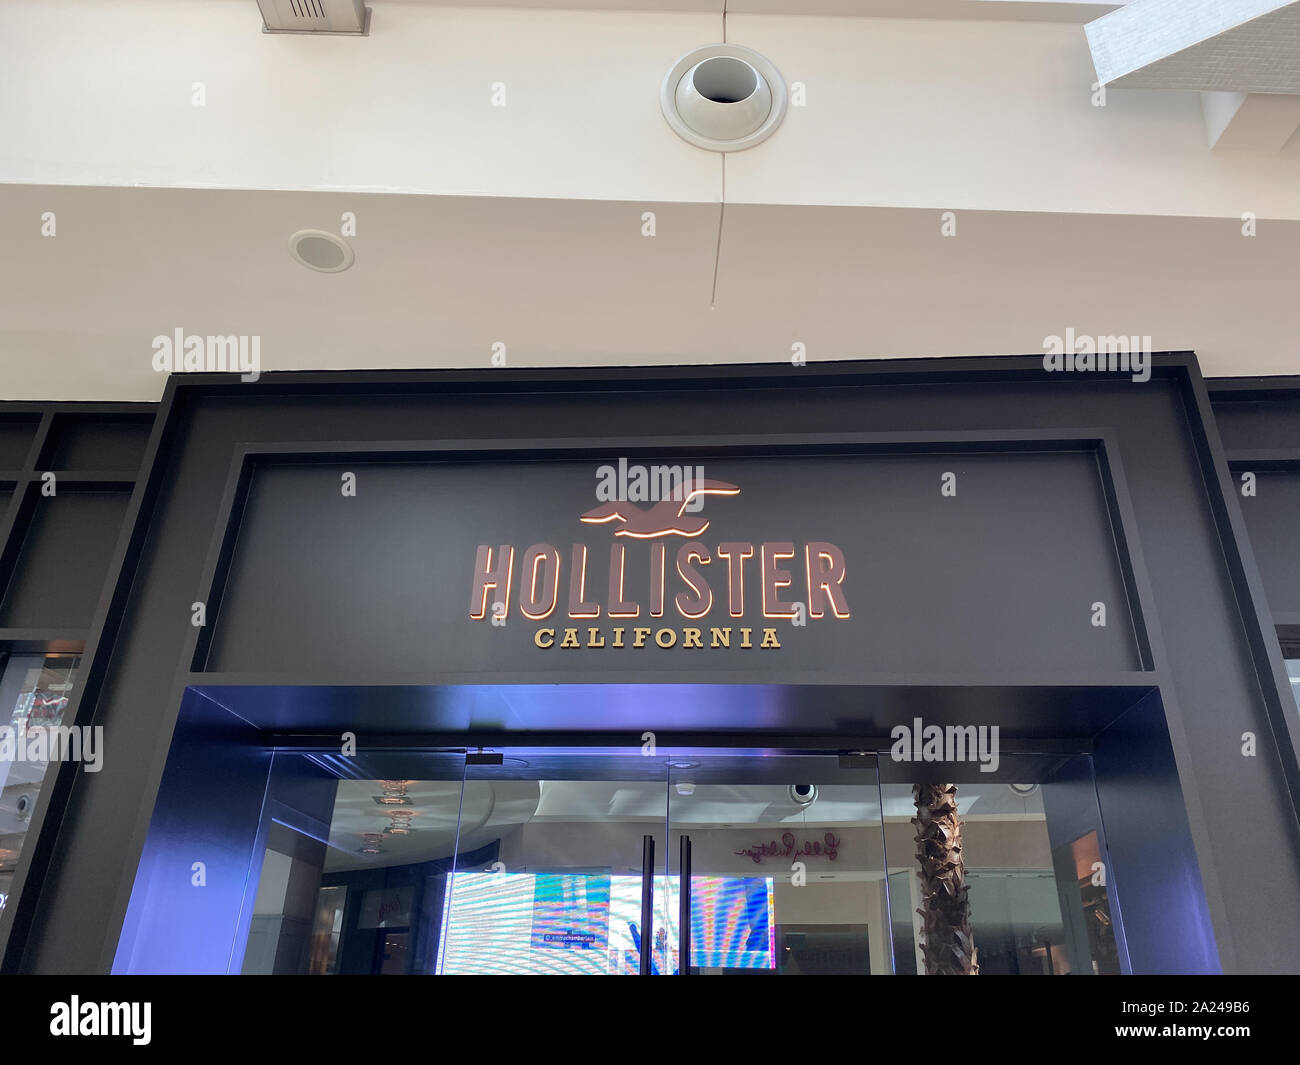 Orlando,FL/USA-9/30/19: A Hollister clothing retail store in an indoor mall.  Hollister is an American lifestyle brand aimed at teenagers. Stock Photo